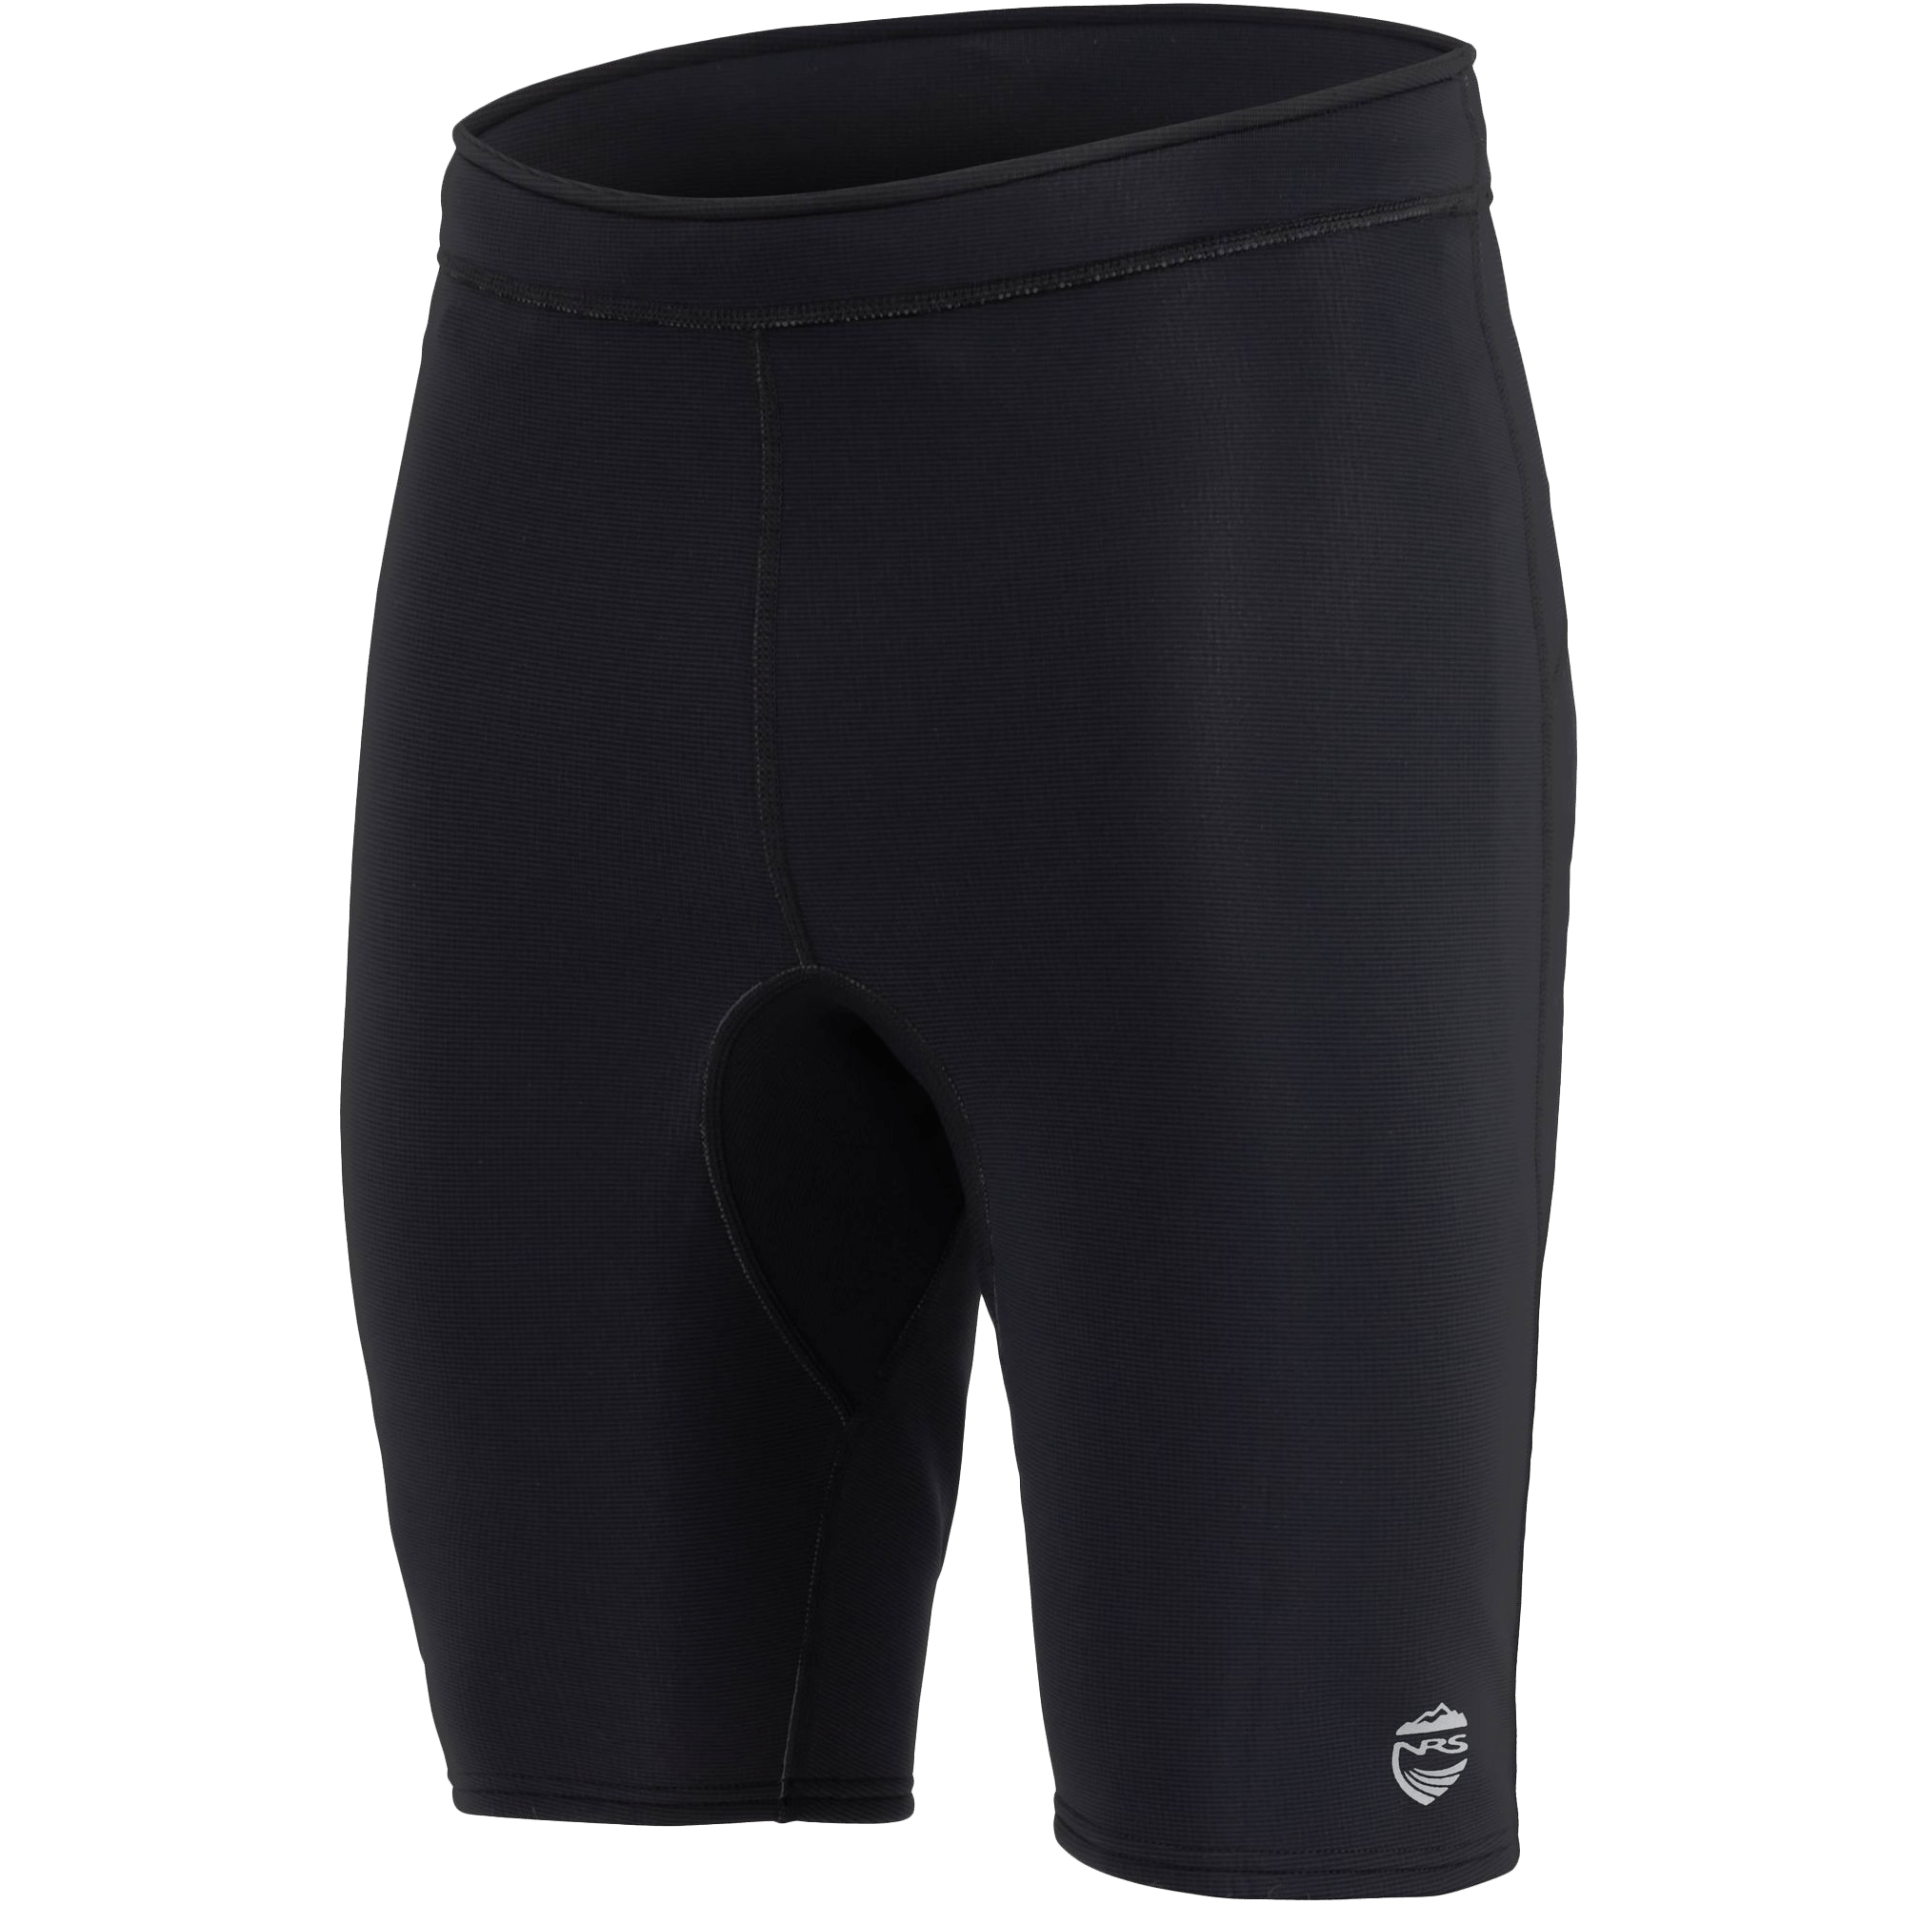 nrs_mens_hydroskin_05mm_short_left_angle.png